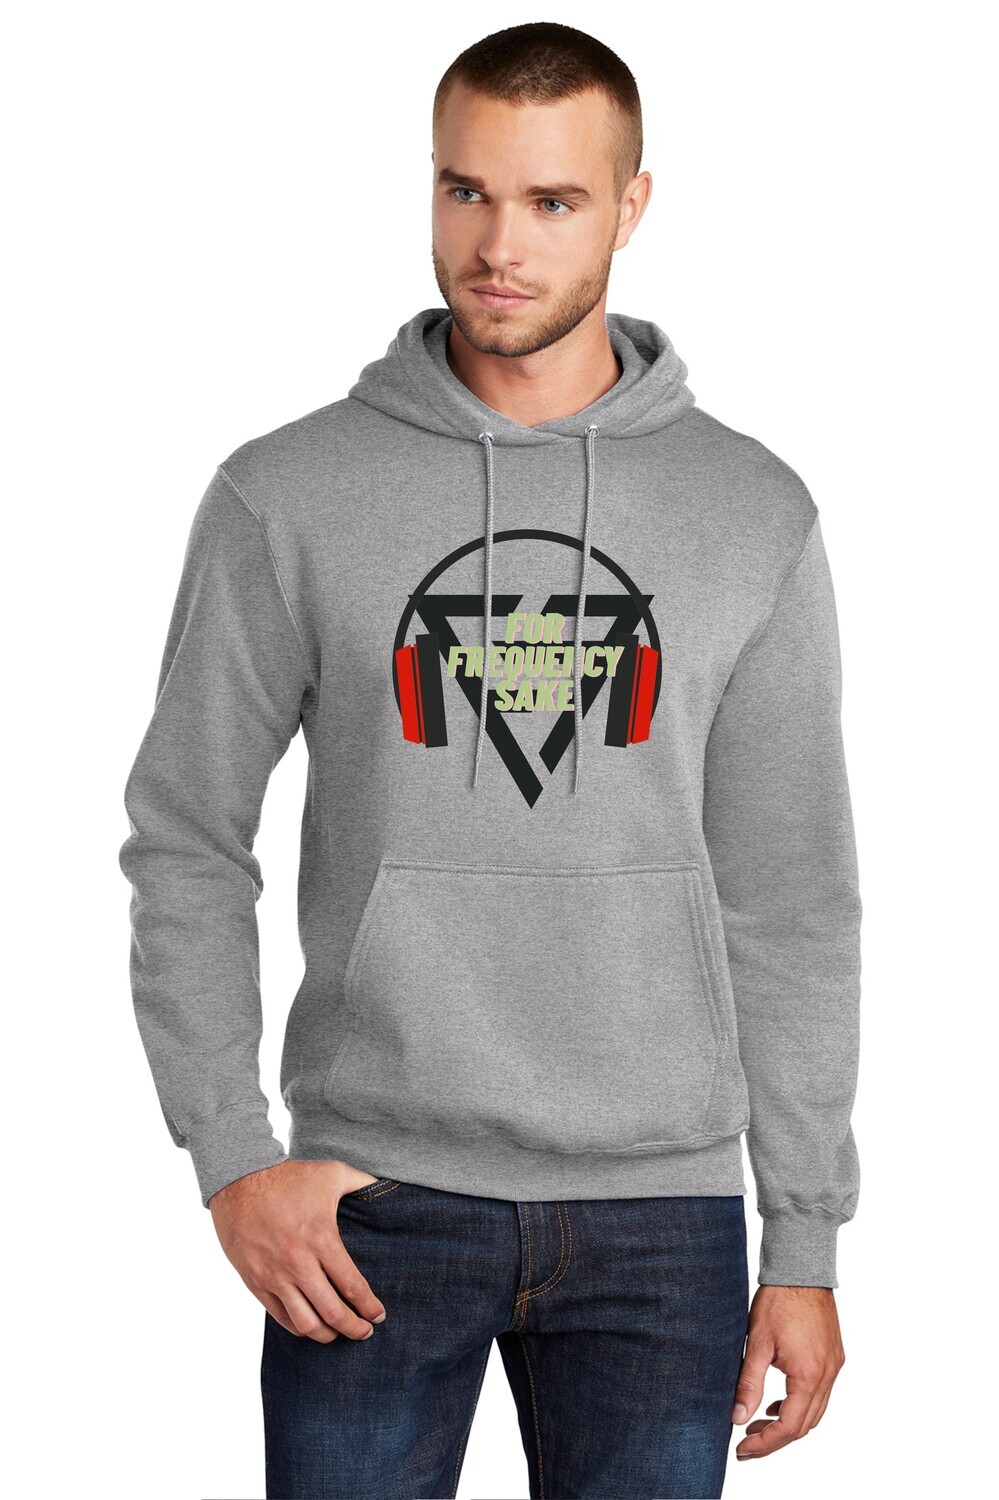 For Frequency Sake Hoodie